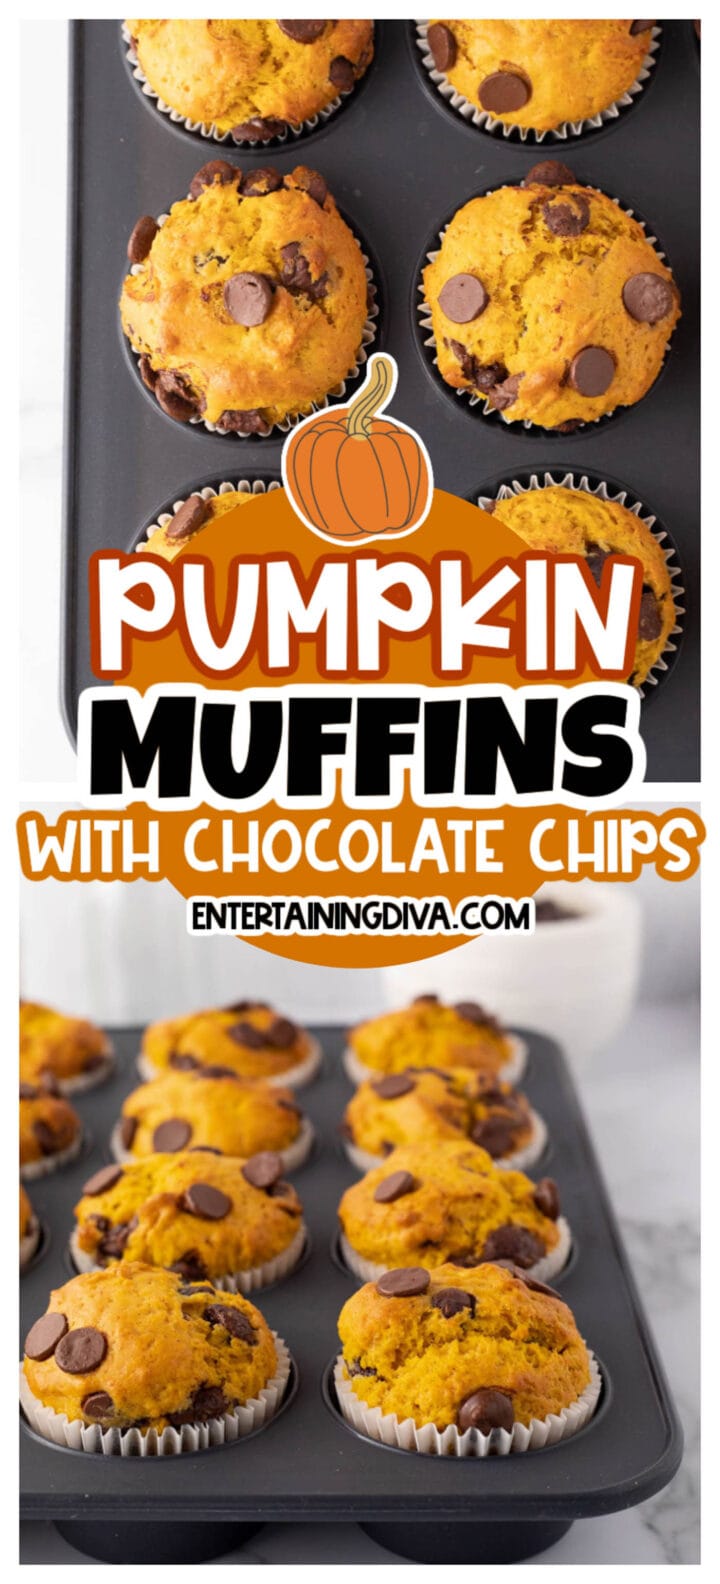 Pumpkin muffins with chocolate chips.